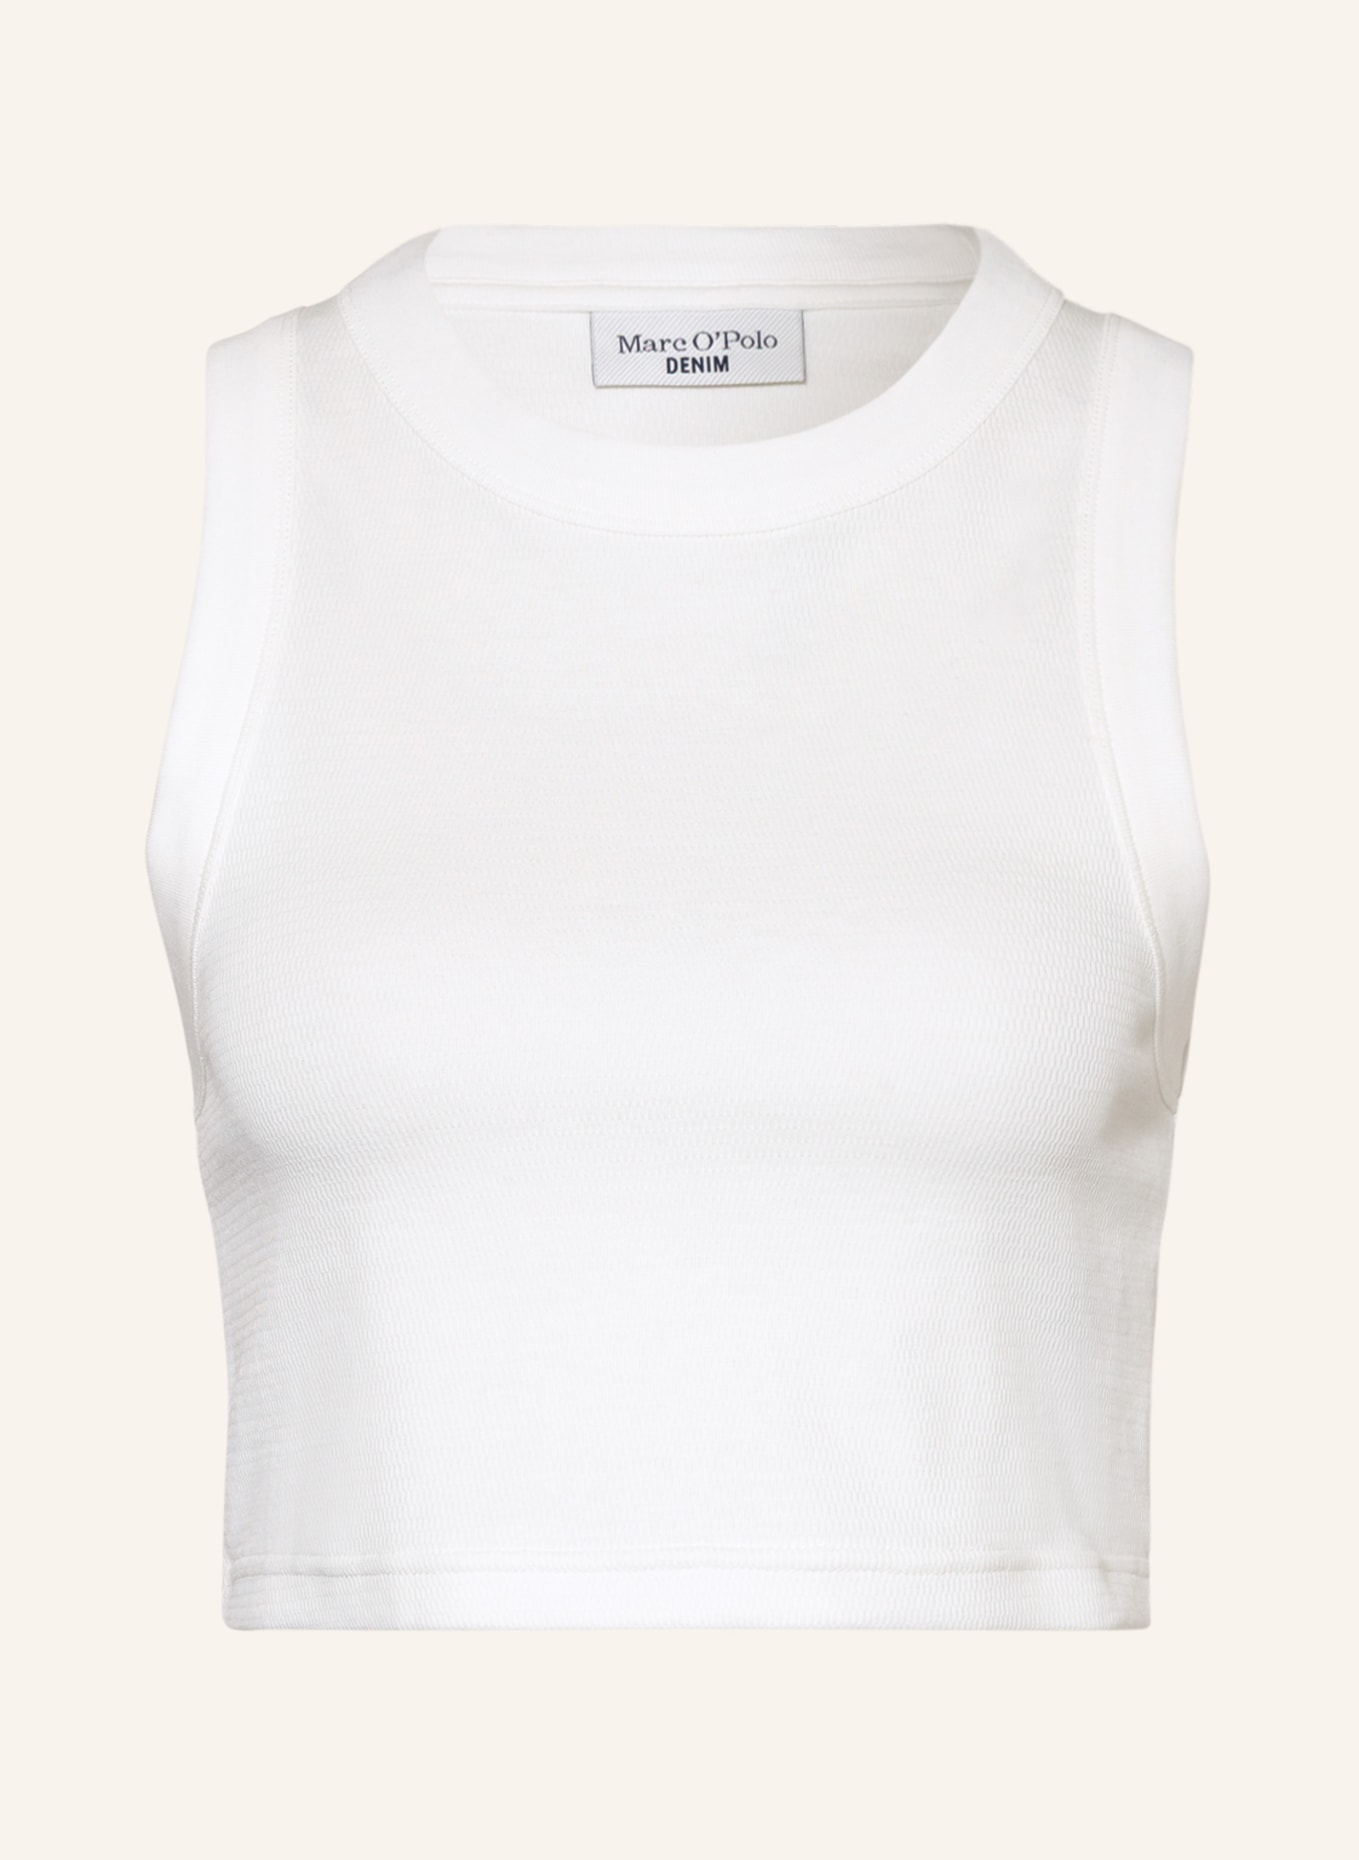 Marc O'Polo DENIM Cropped top, Color: WHITE (Image 1)